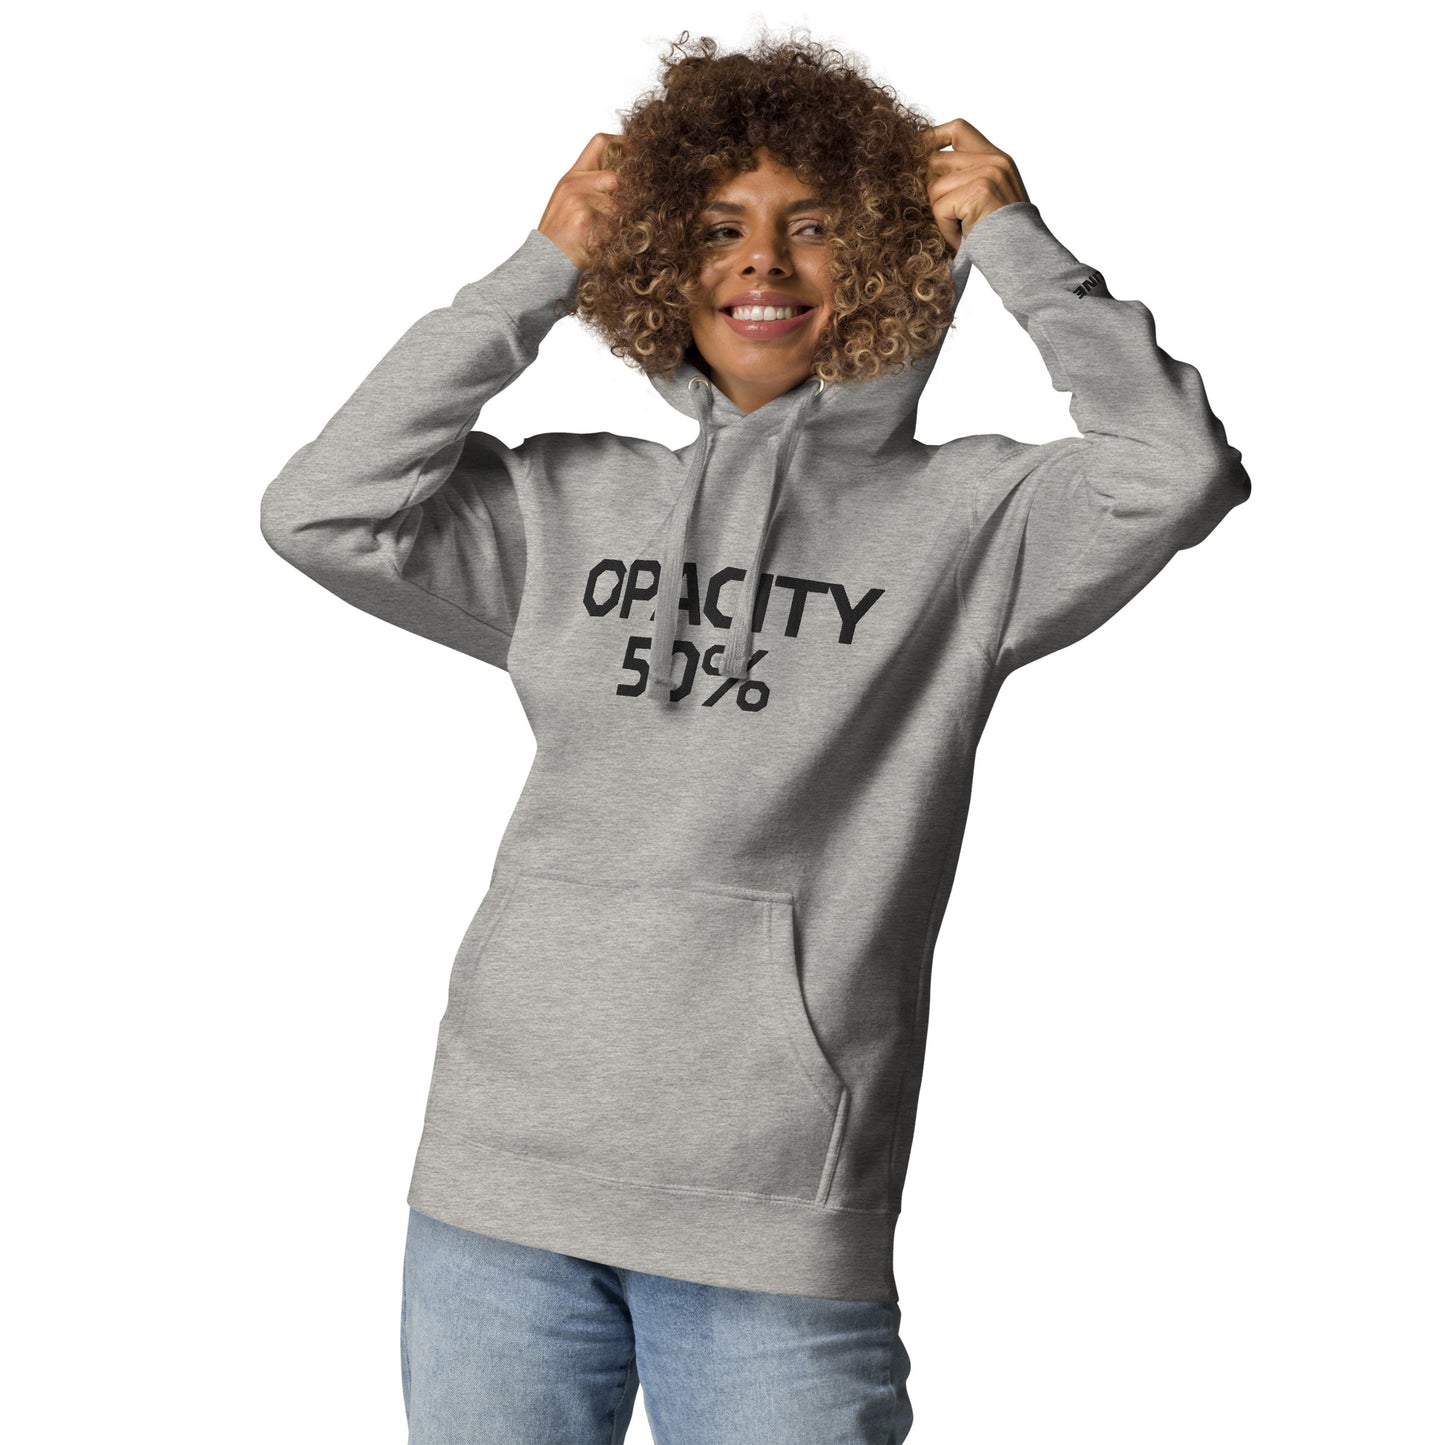 Opacity 50% Large Embroidery Unisex Hoodie